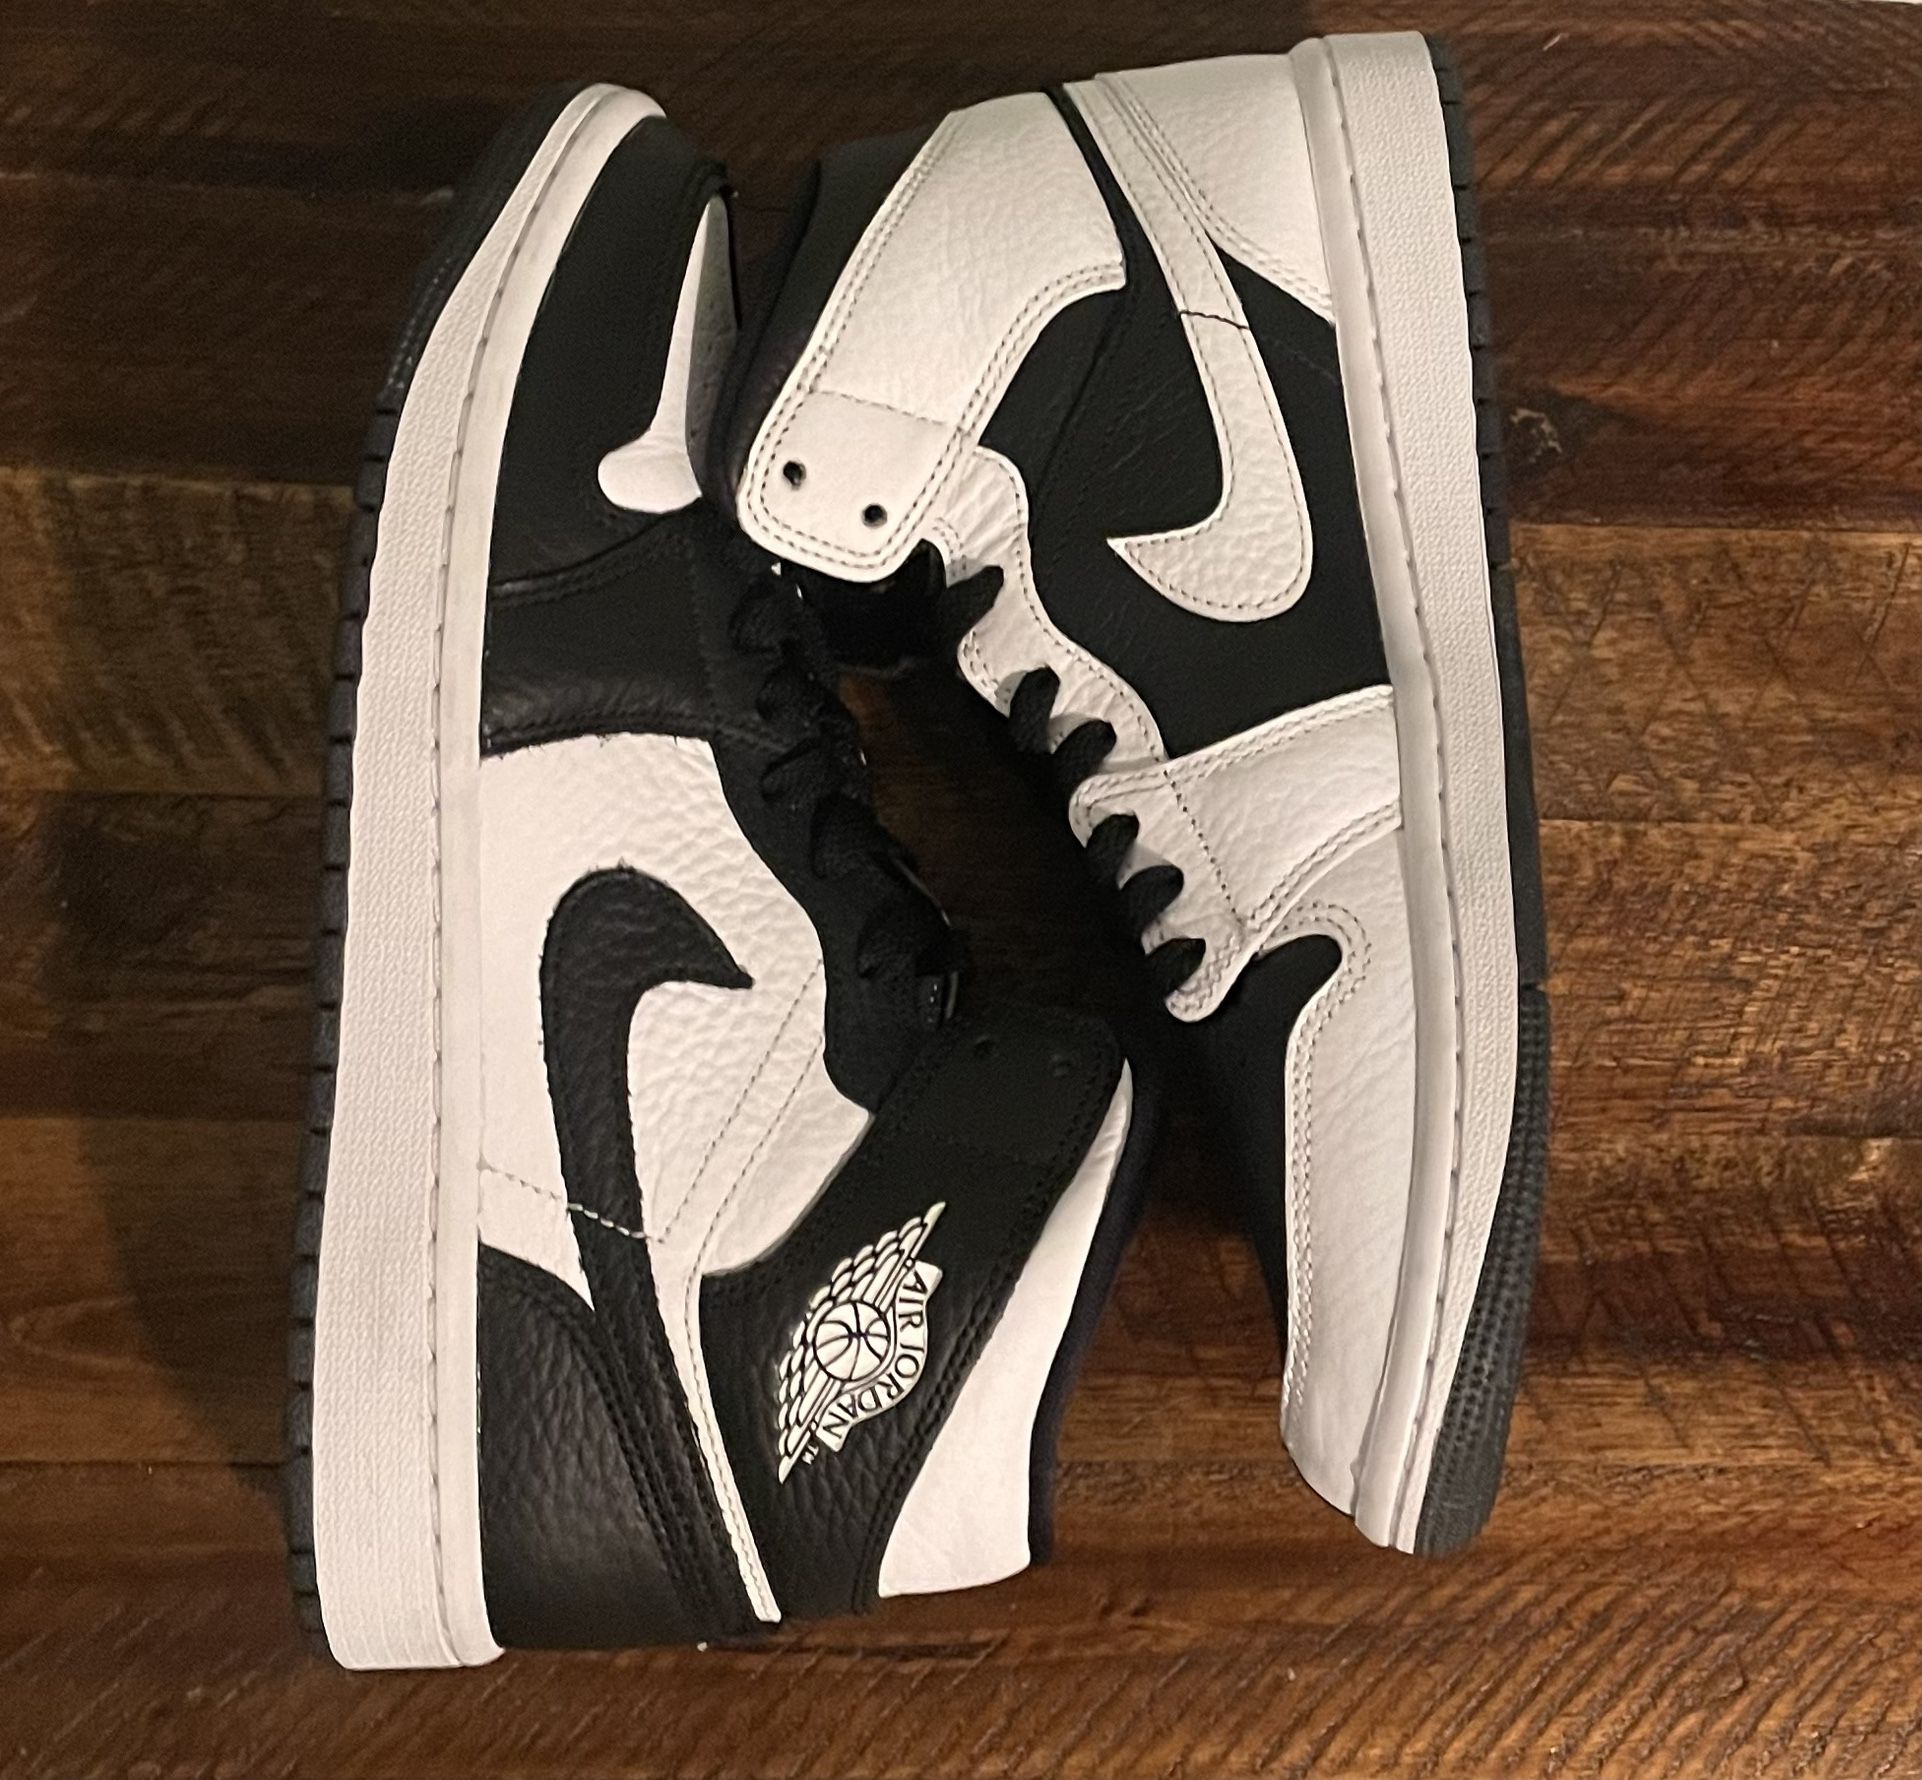  VNDS Jordan 1 Mid “Switch” Size 9w 7.5m - I Want To Trade